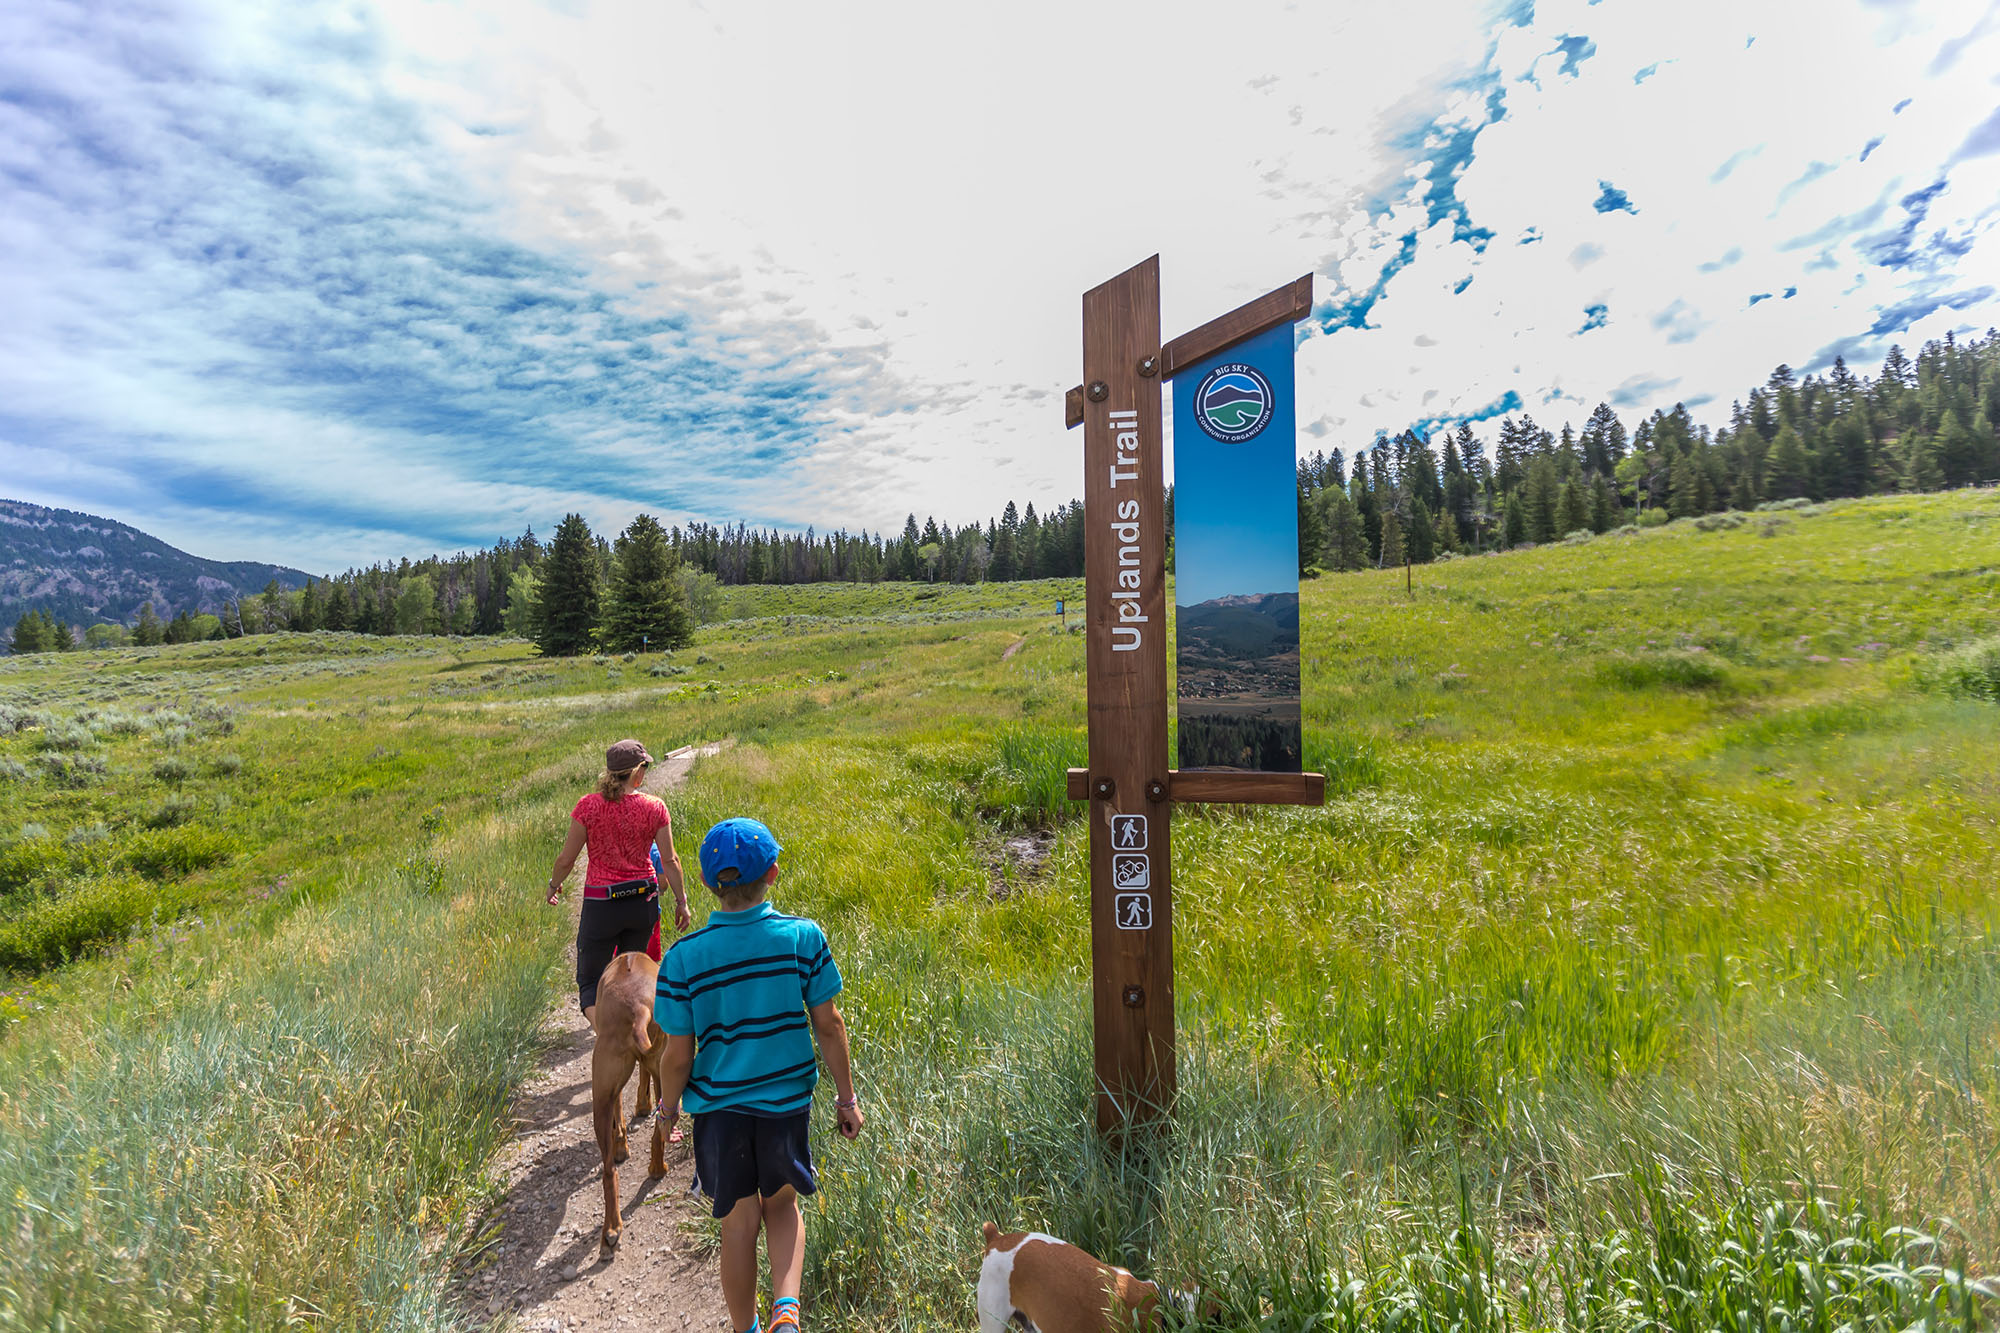 Hikers heading up Uplands trail in Big Sky